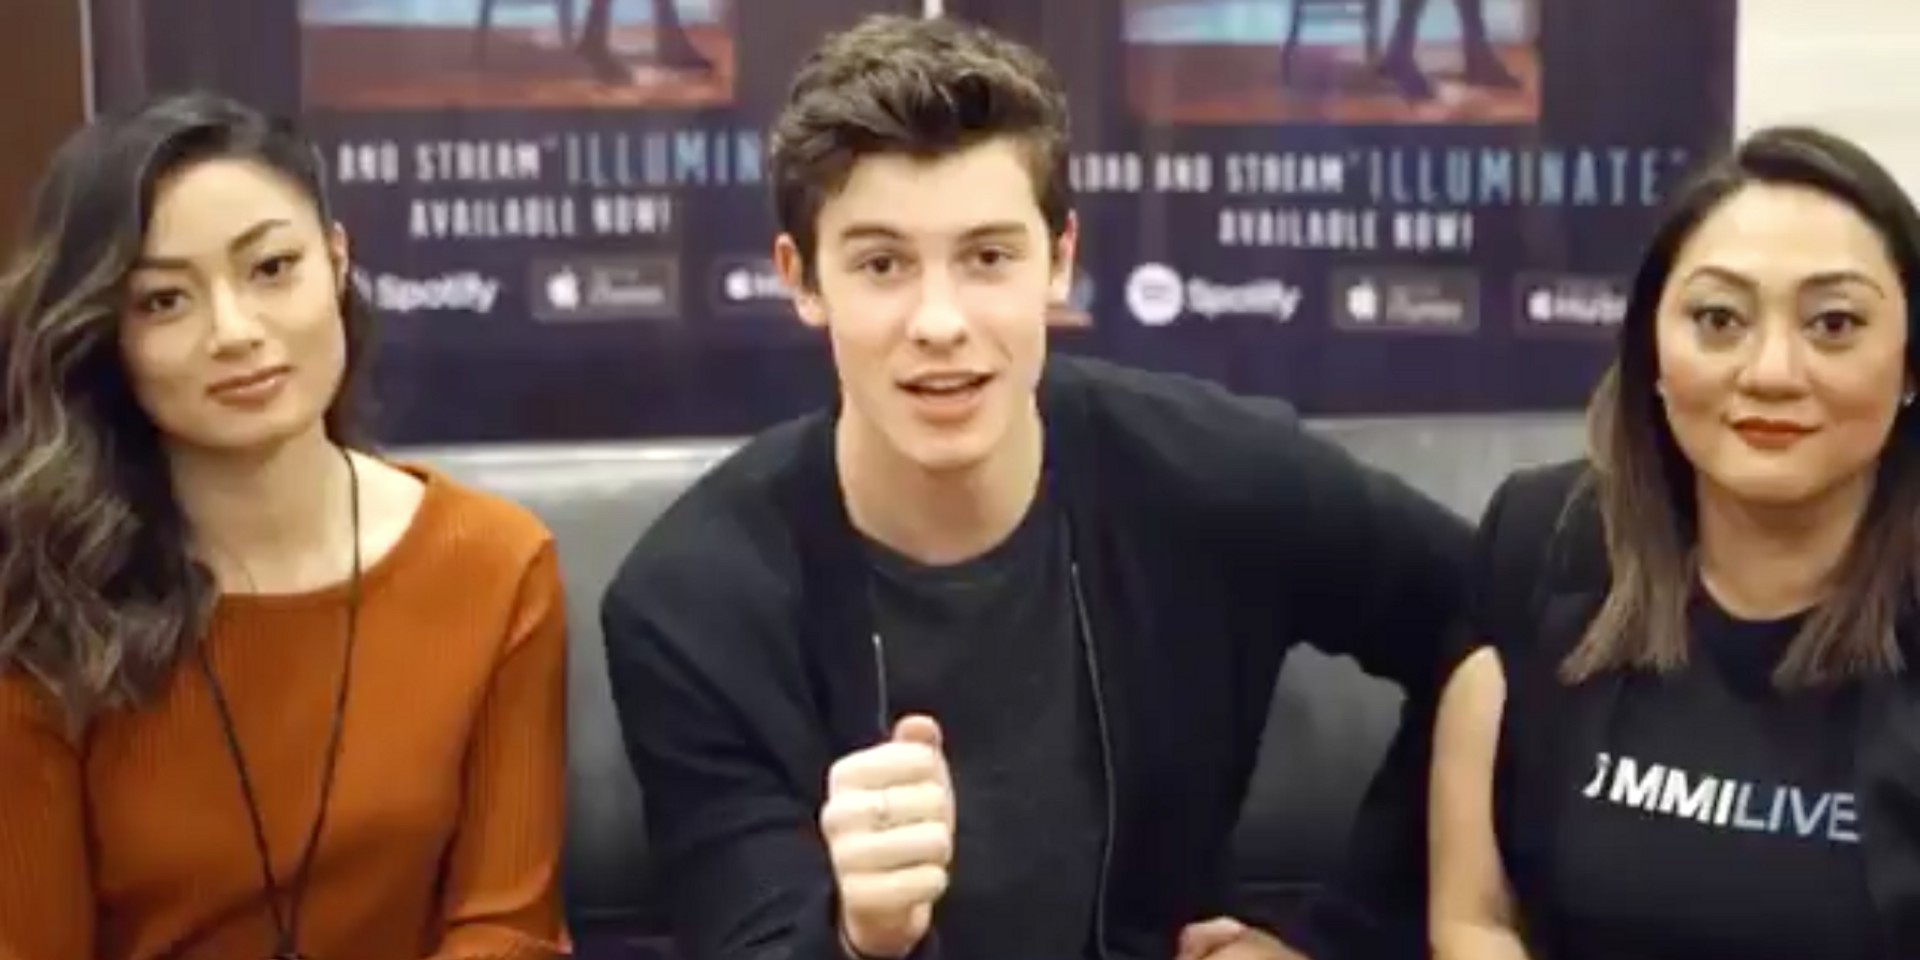 WATCH: MMI Live debuts new show, 'R Pass Live', with Shawn Mendes in pilot episode